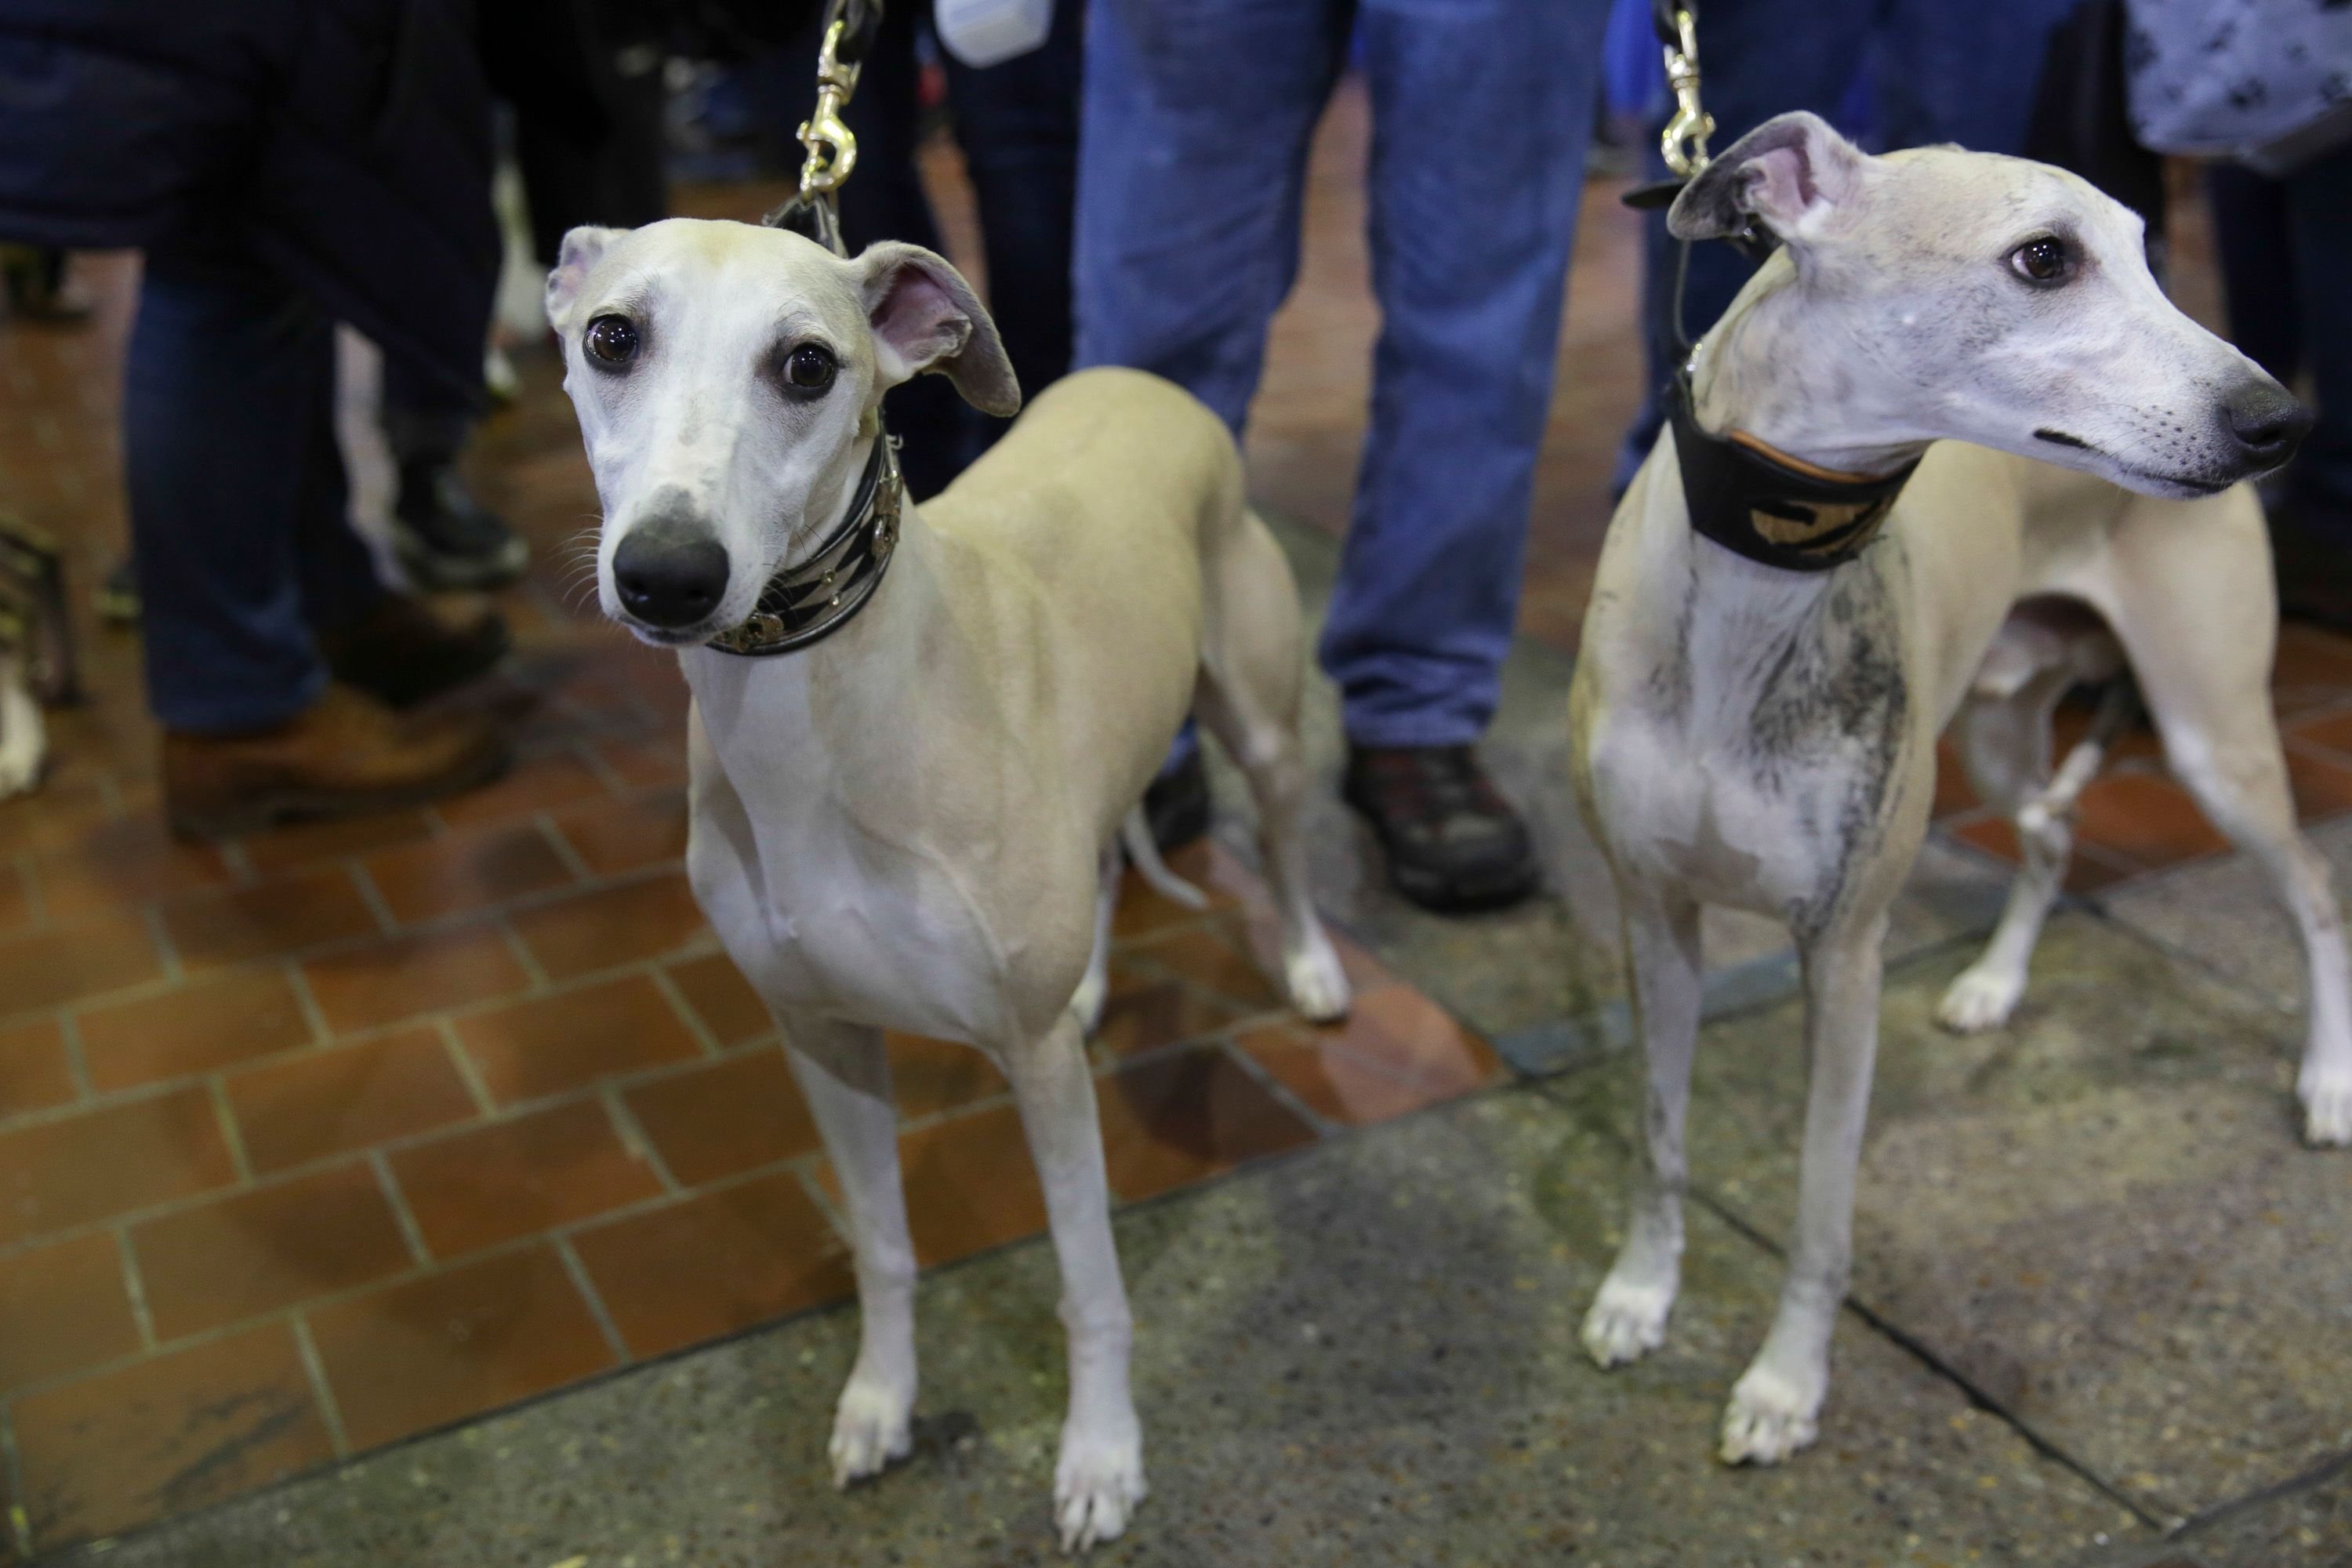 Whippets named Moe and Houdini participate in the 8th annual American Kennel Club Meet the Breeds event held at Pier 92 on February 11, 2017 in New York City. | Source: Getty Images